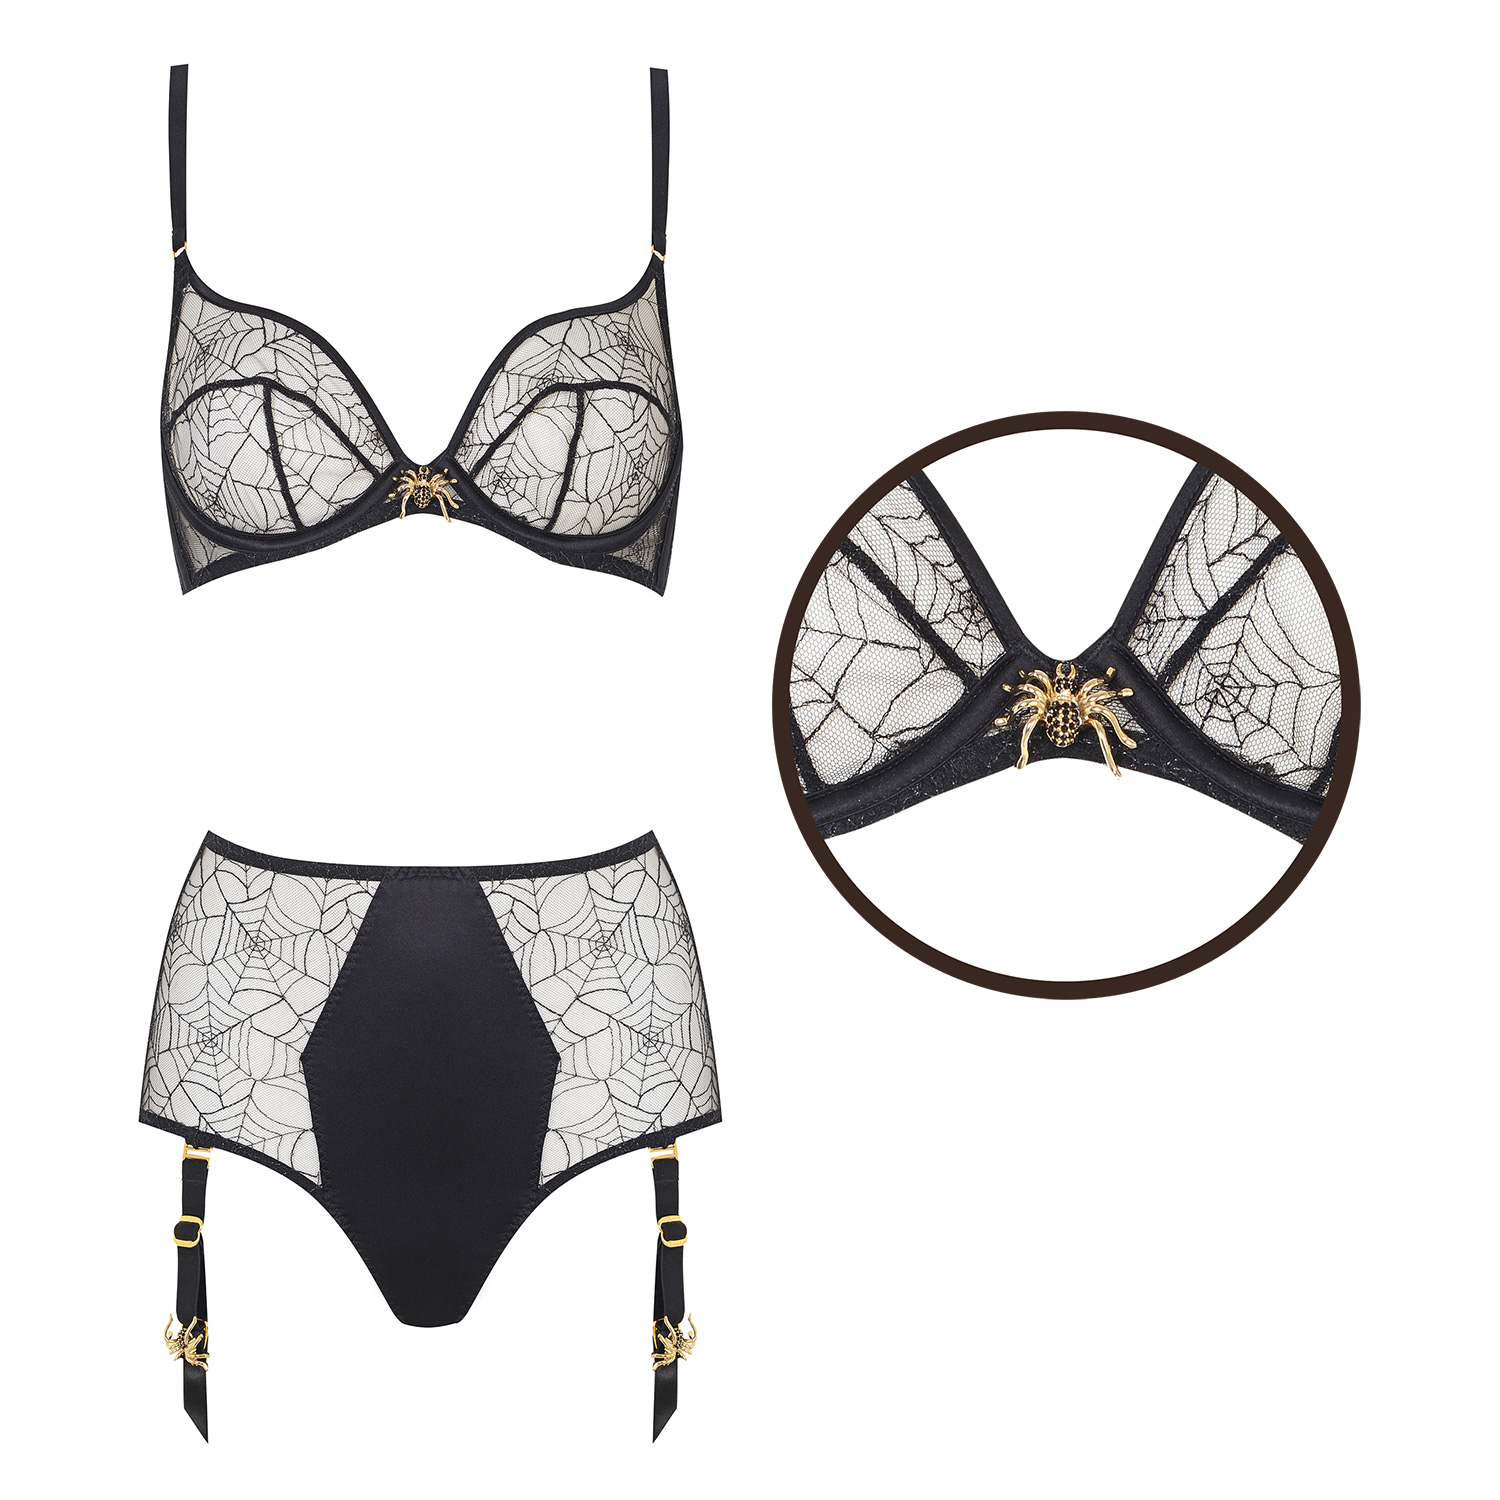 Charlotte Olympia and Agent Provocateur collaboration